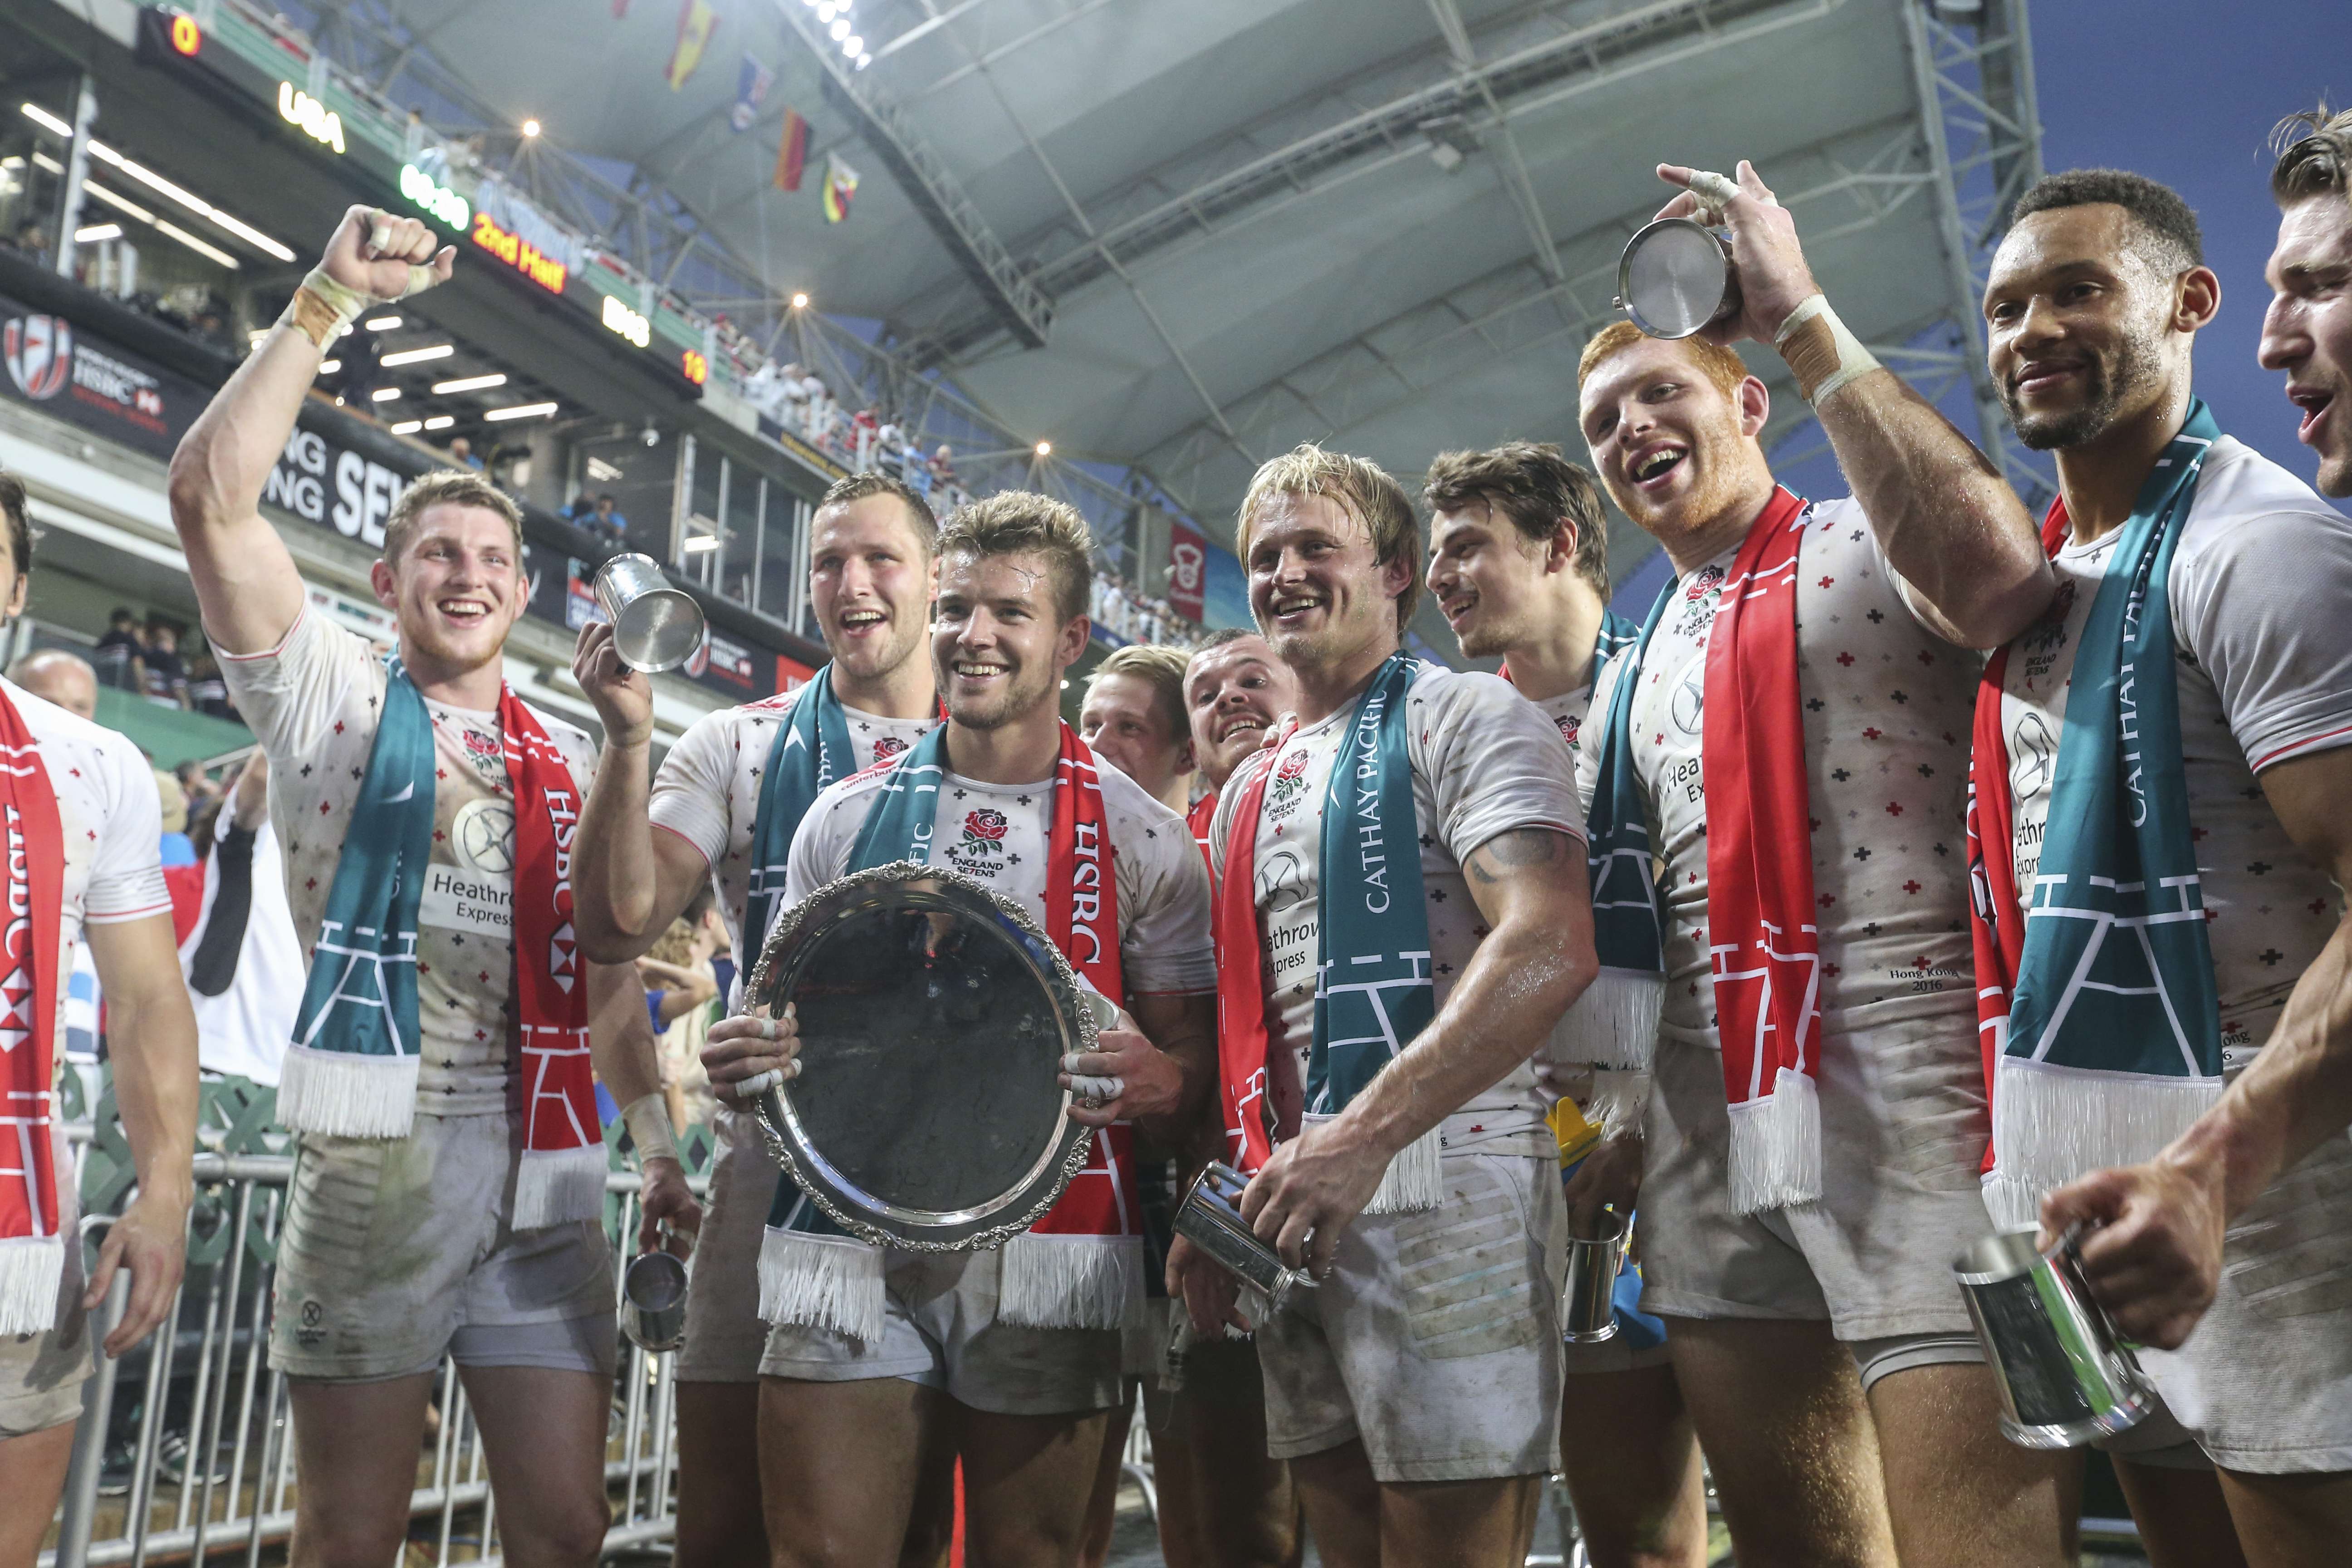 England players celebrate their Plate final victory over the USA. Photo: KY Cheng/SCMP